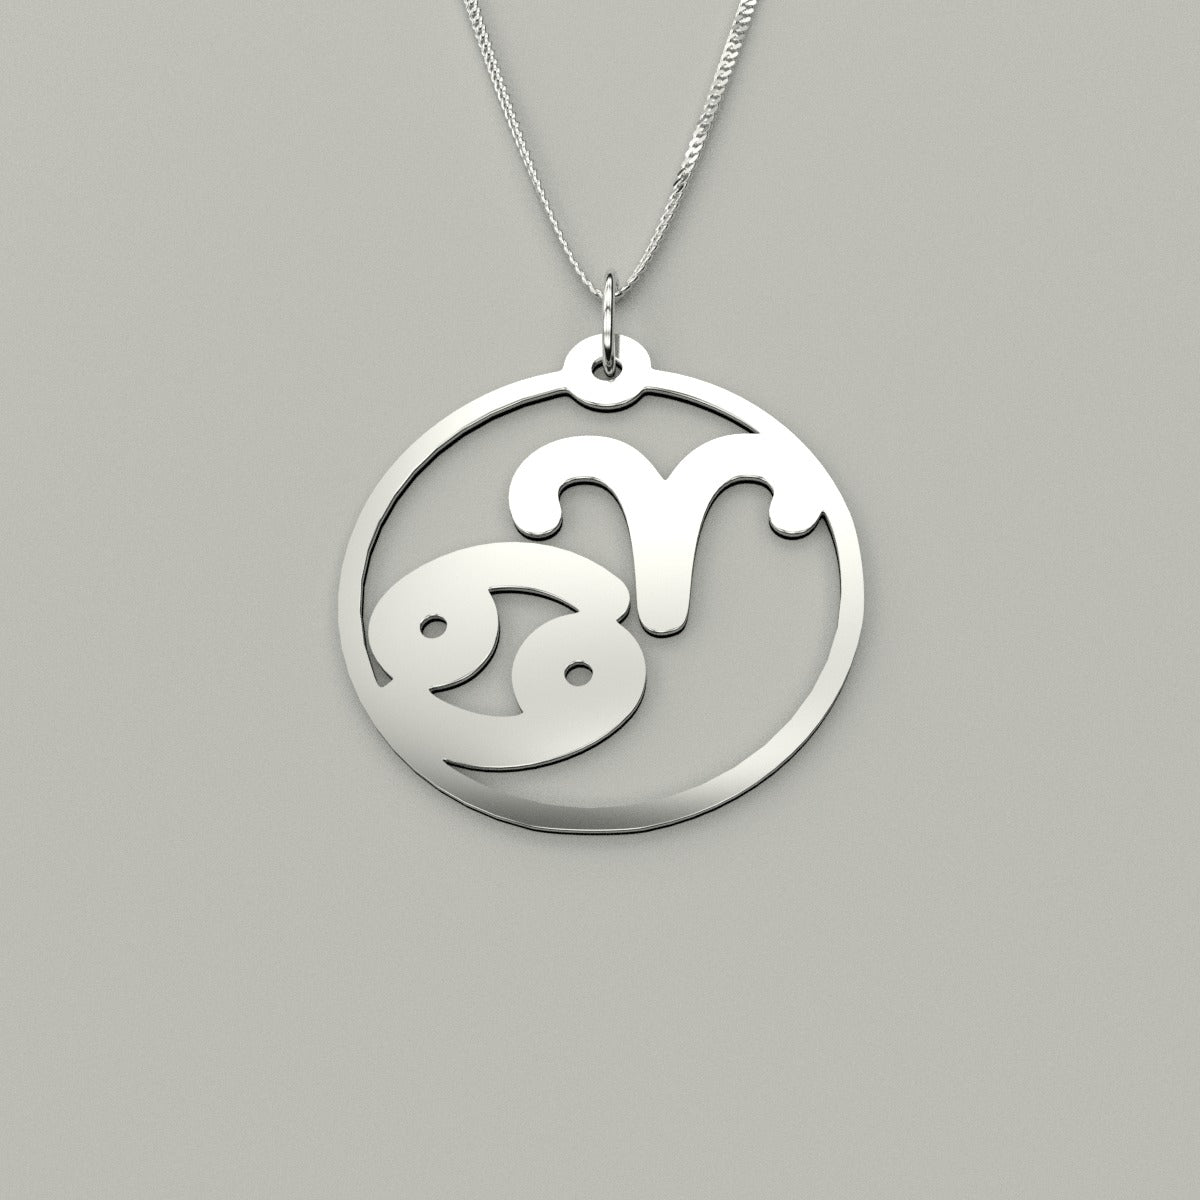 Aries & Cancer - Couple Necklace